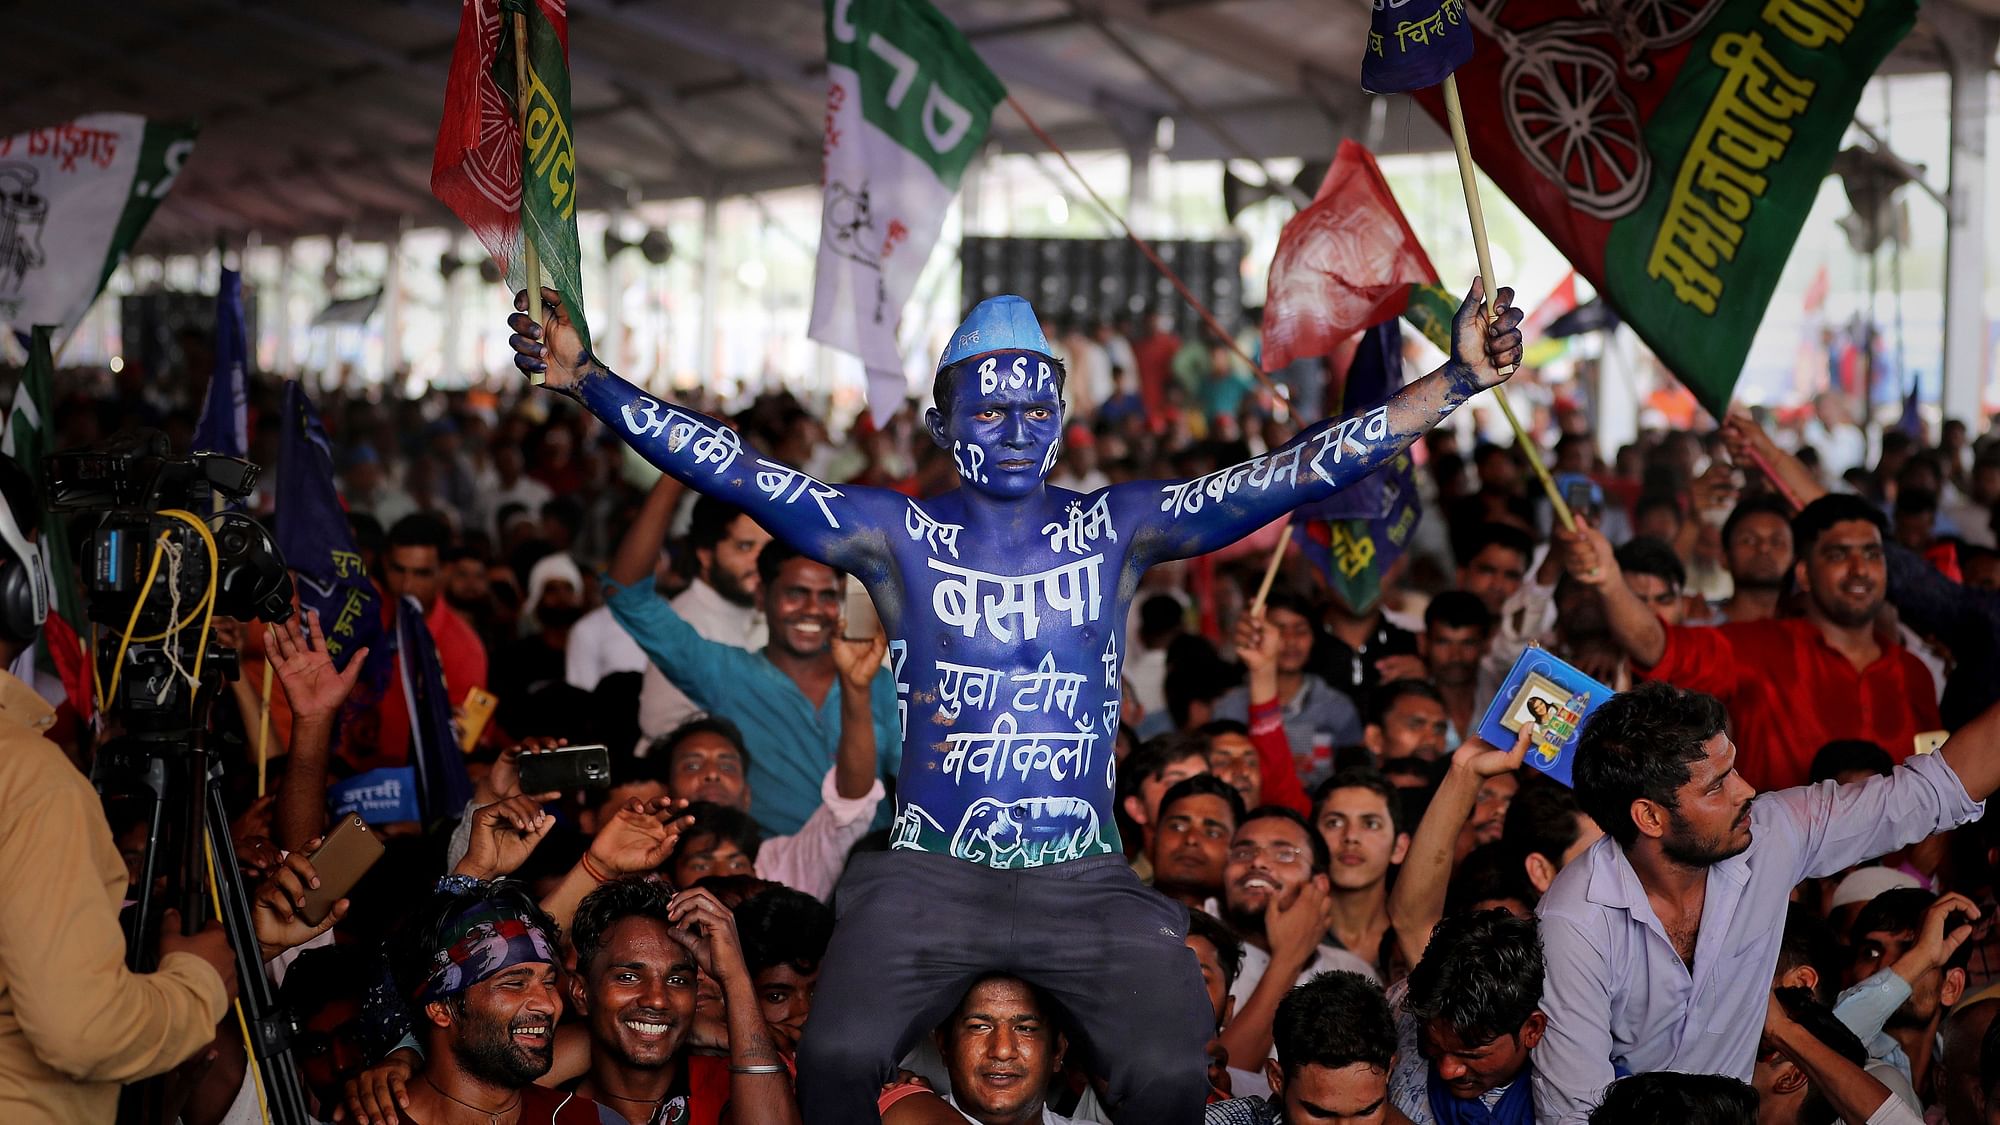 BSP supporter at an election rally in Uttar Pradesh on 7 April.